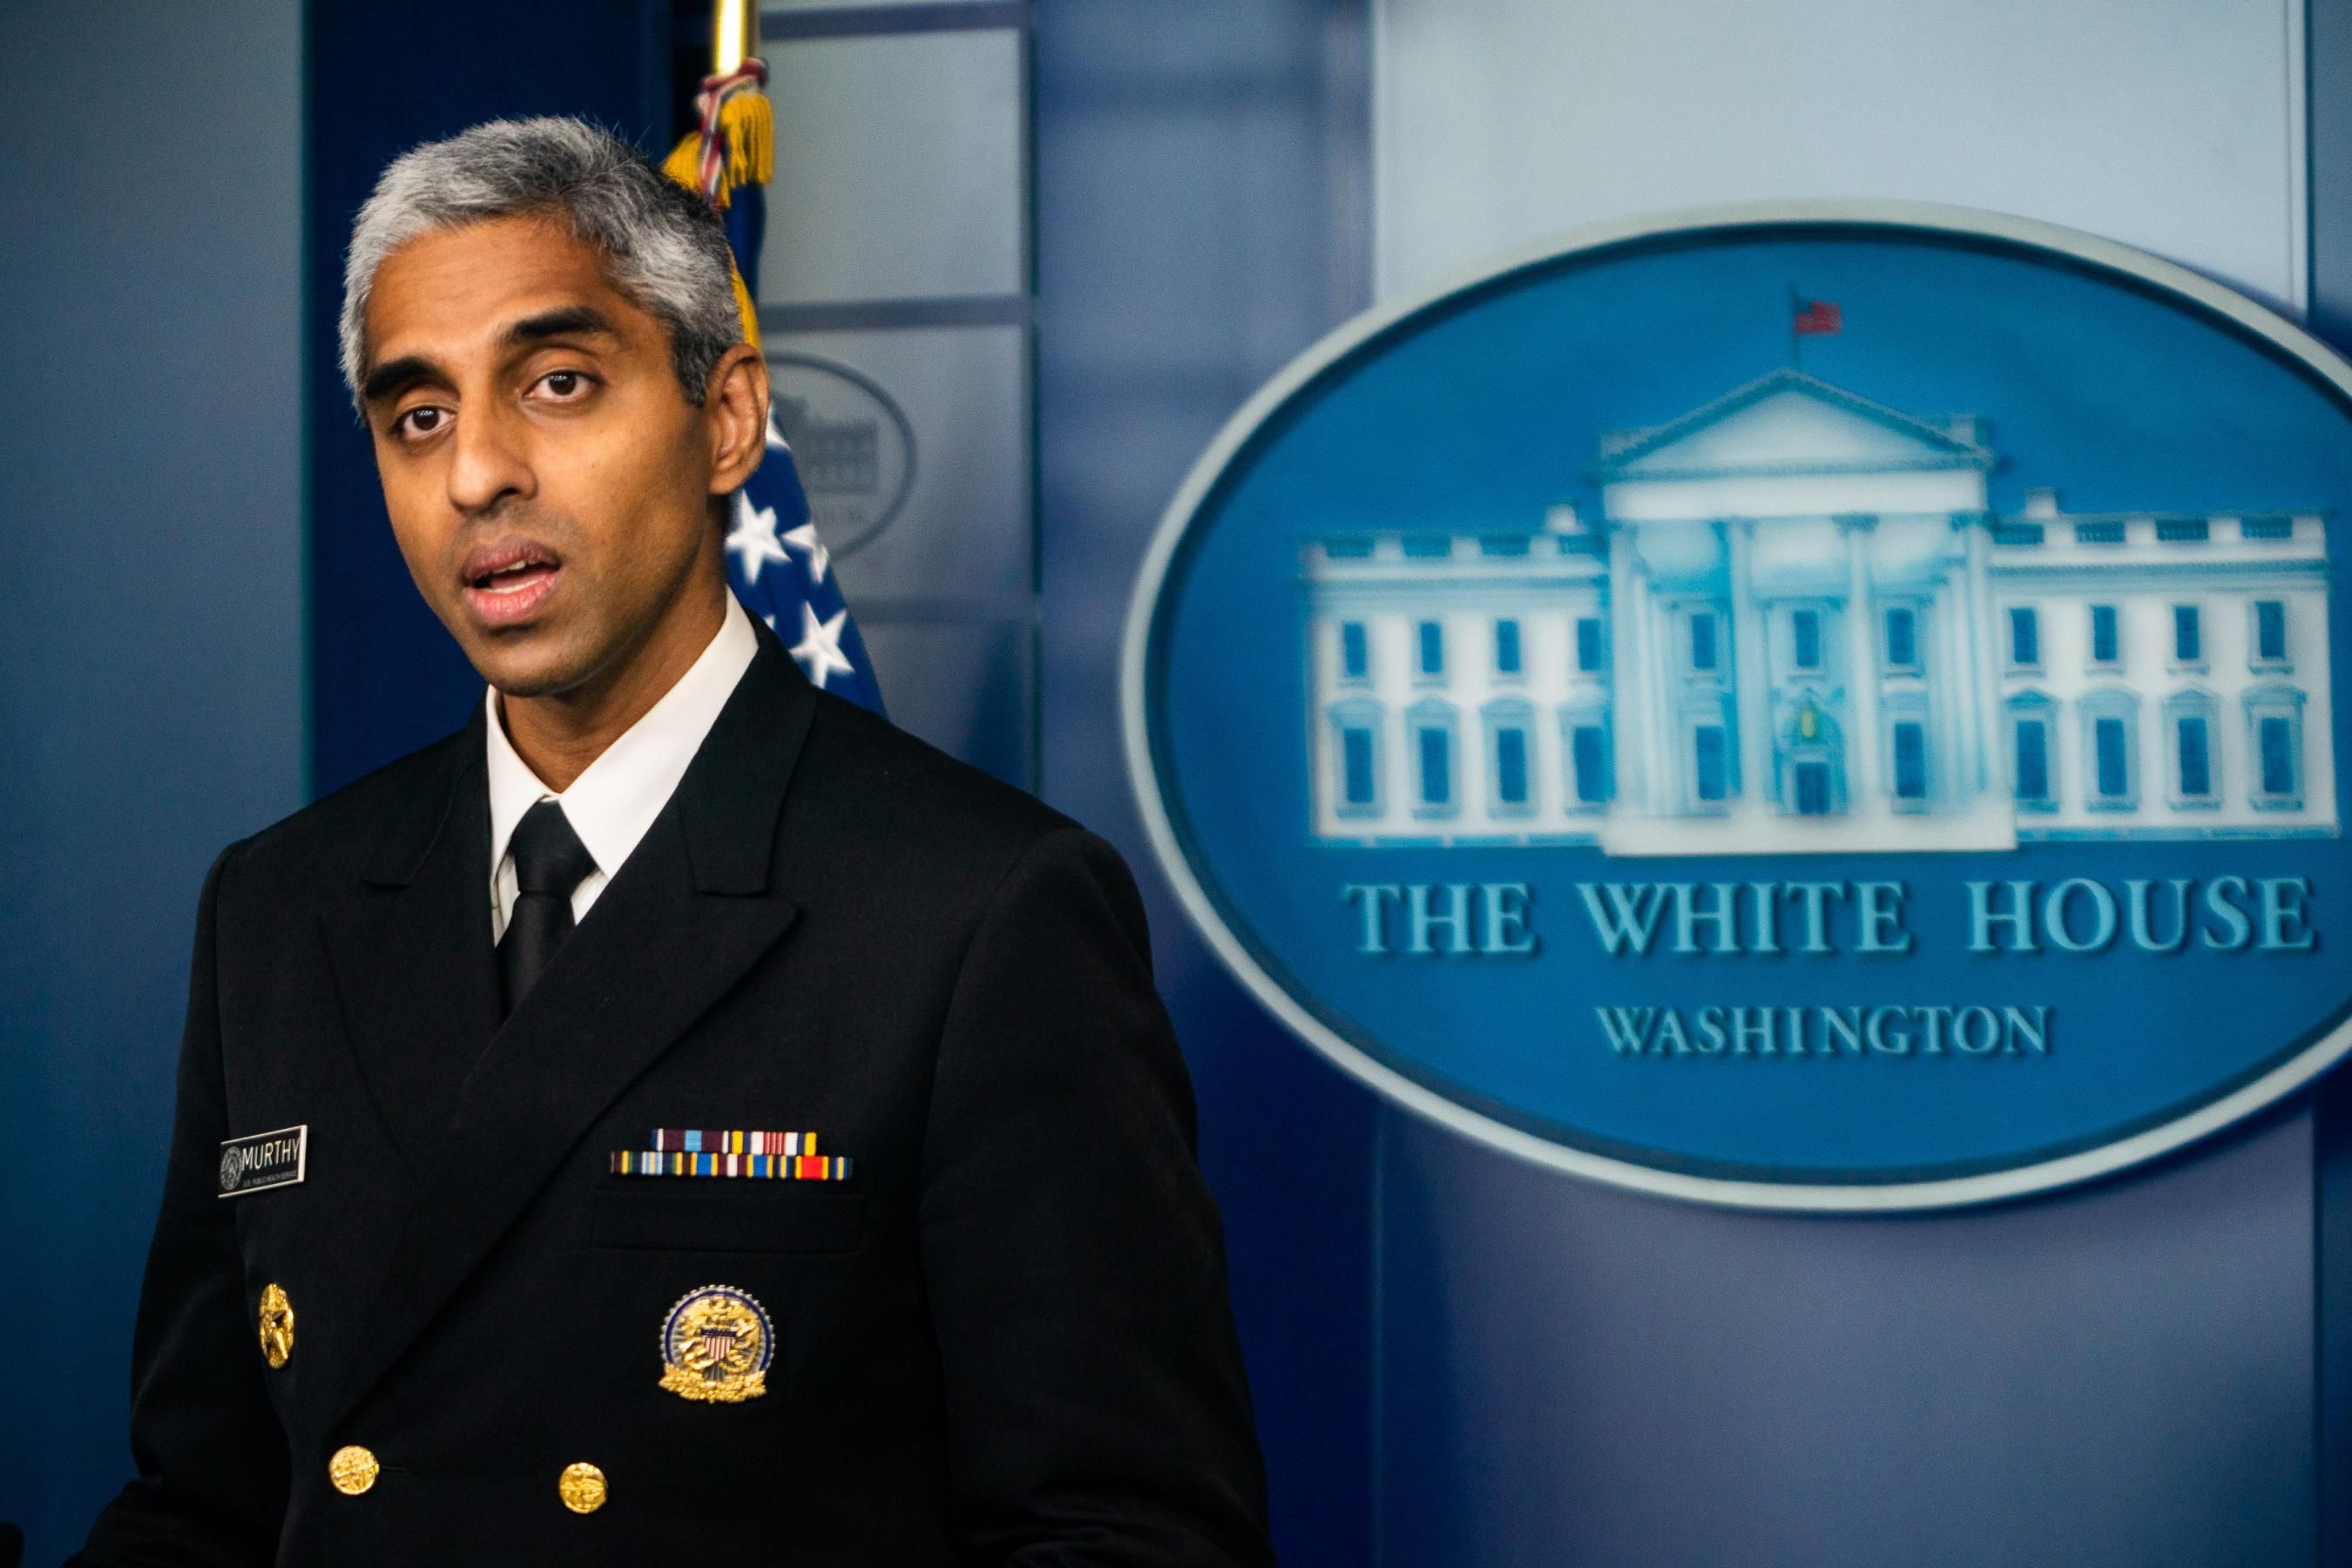 U.S. Surgeon General Dr. Vivek Murthy speaks during the daily press briefing in the James Brady Room at the White House on July 15, 2021. (Photo: Demetrius Freeman/The Washington Post via Getty Images)